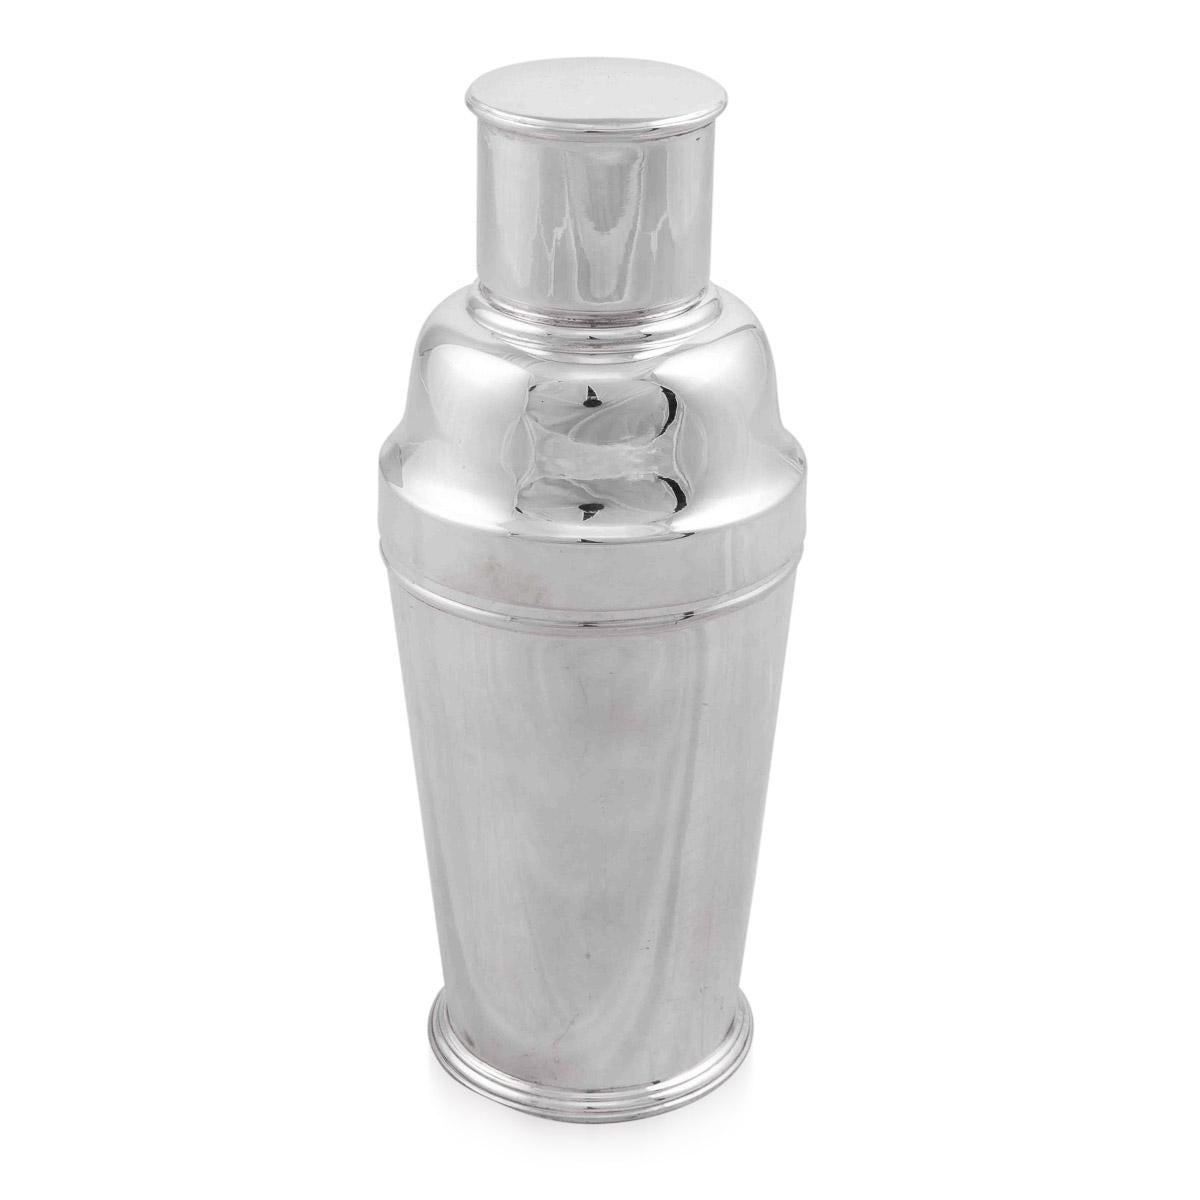 A good quality silver plated cocktail shaker made for the British India Steam Navigation Company. Dating to the middle of the 20th century, this shaker would have been on board the steamer ship in the first class cabin bar. The thick gauge unlike